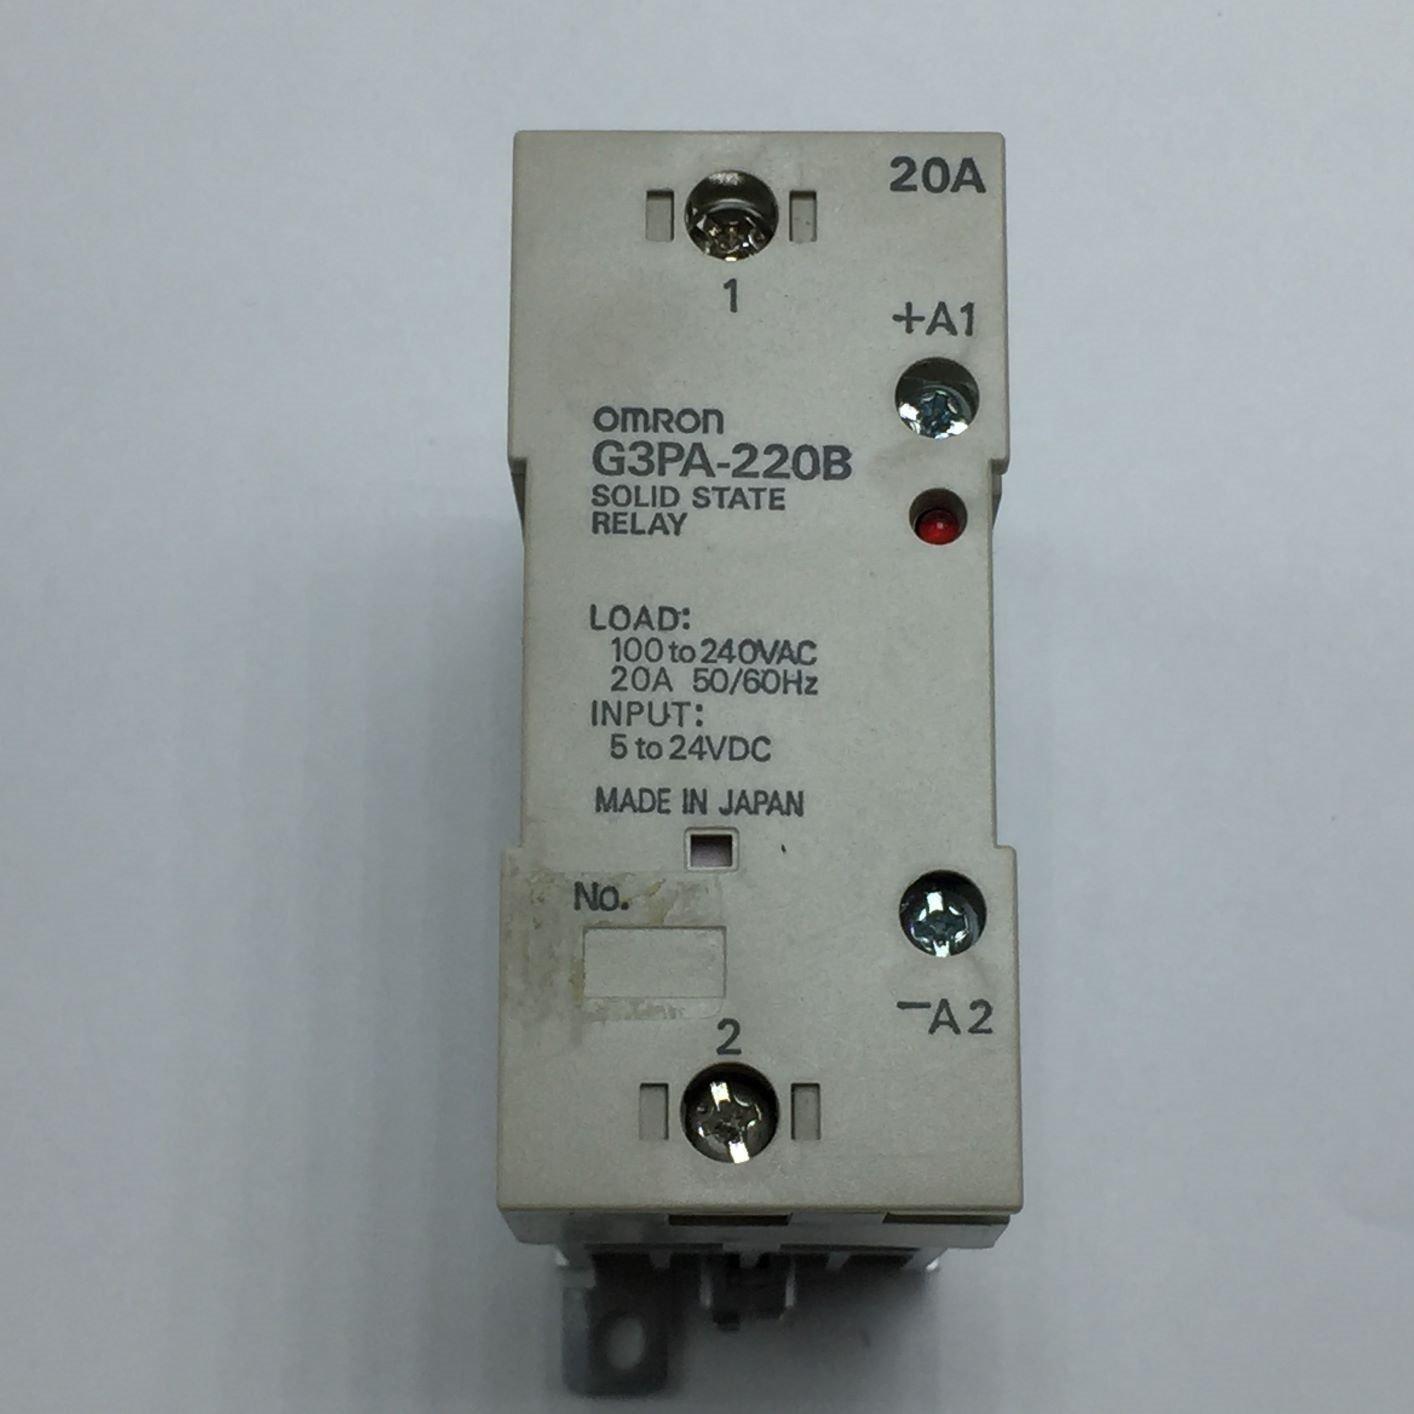 OMRON G3PA-220B SOLID STATE RELAY  TESTED EXCELLENT 